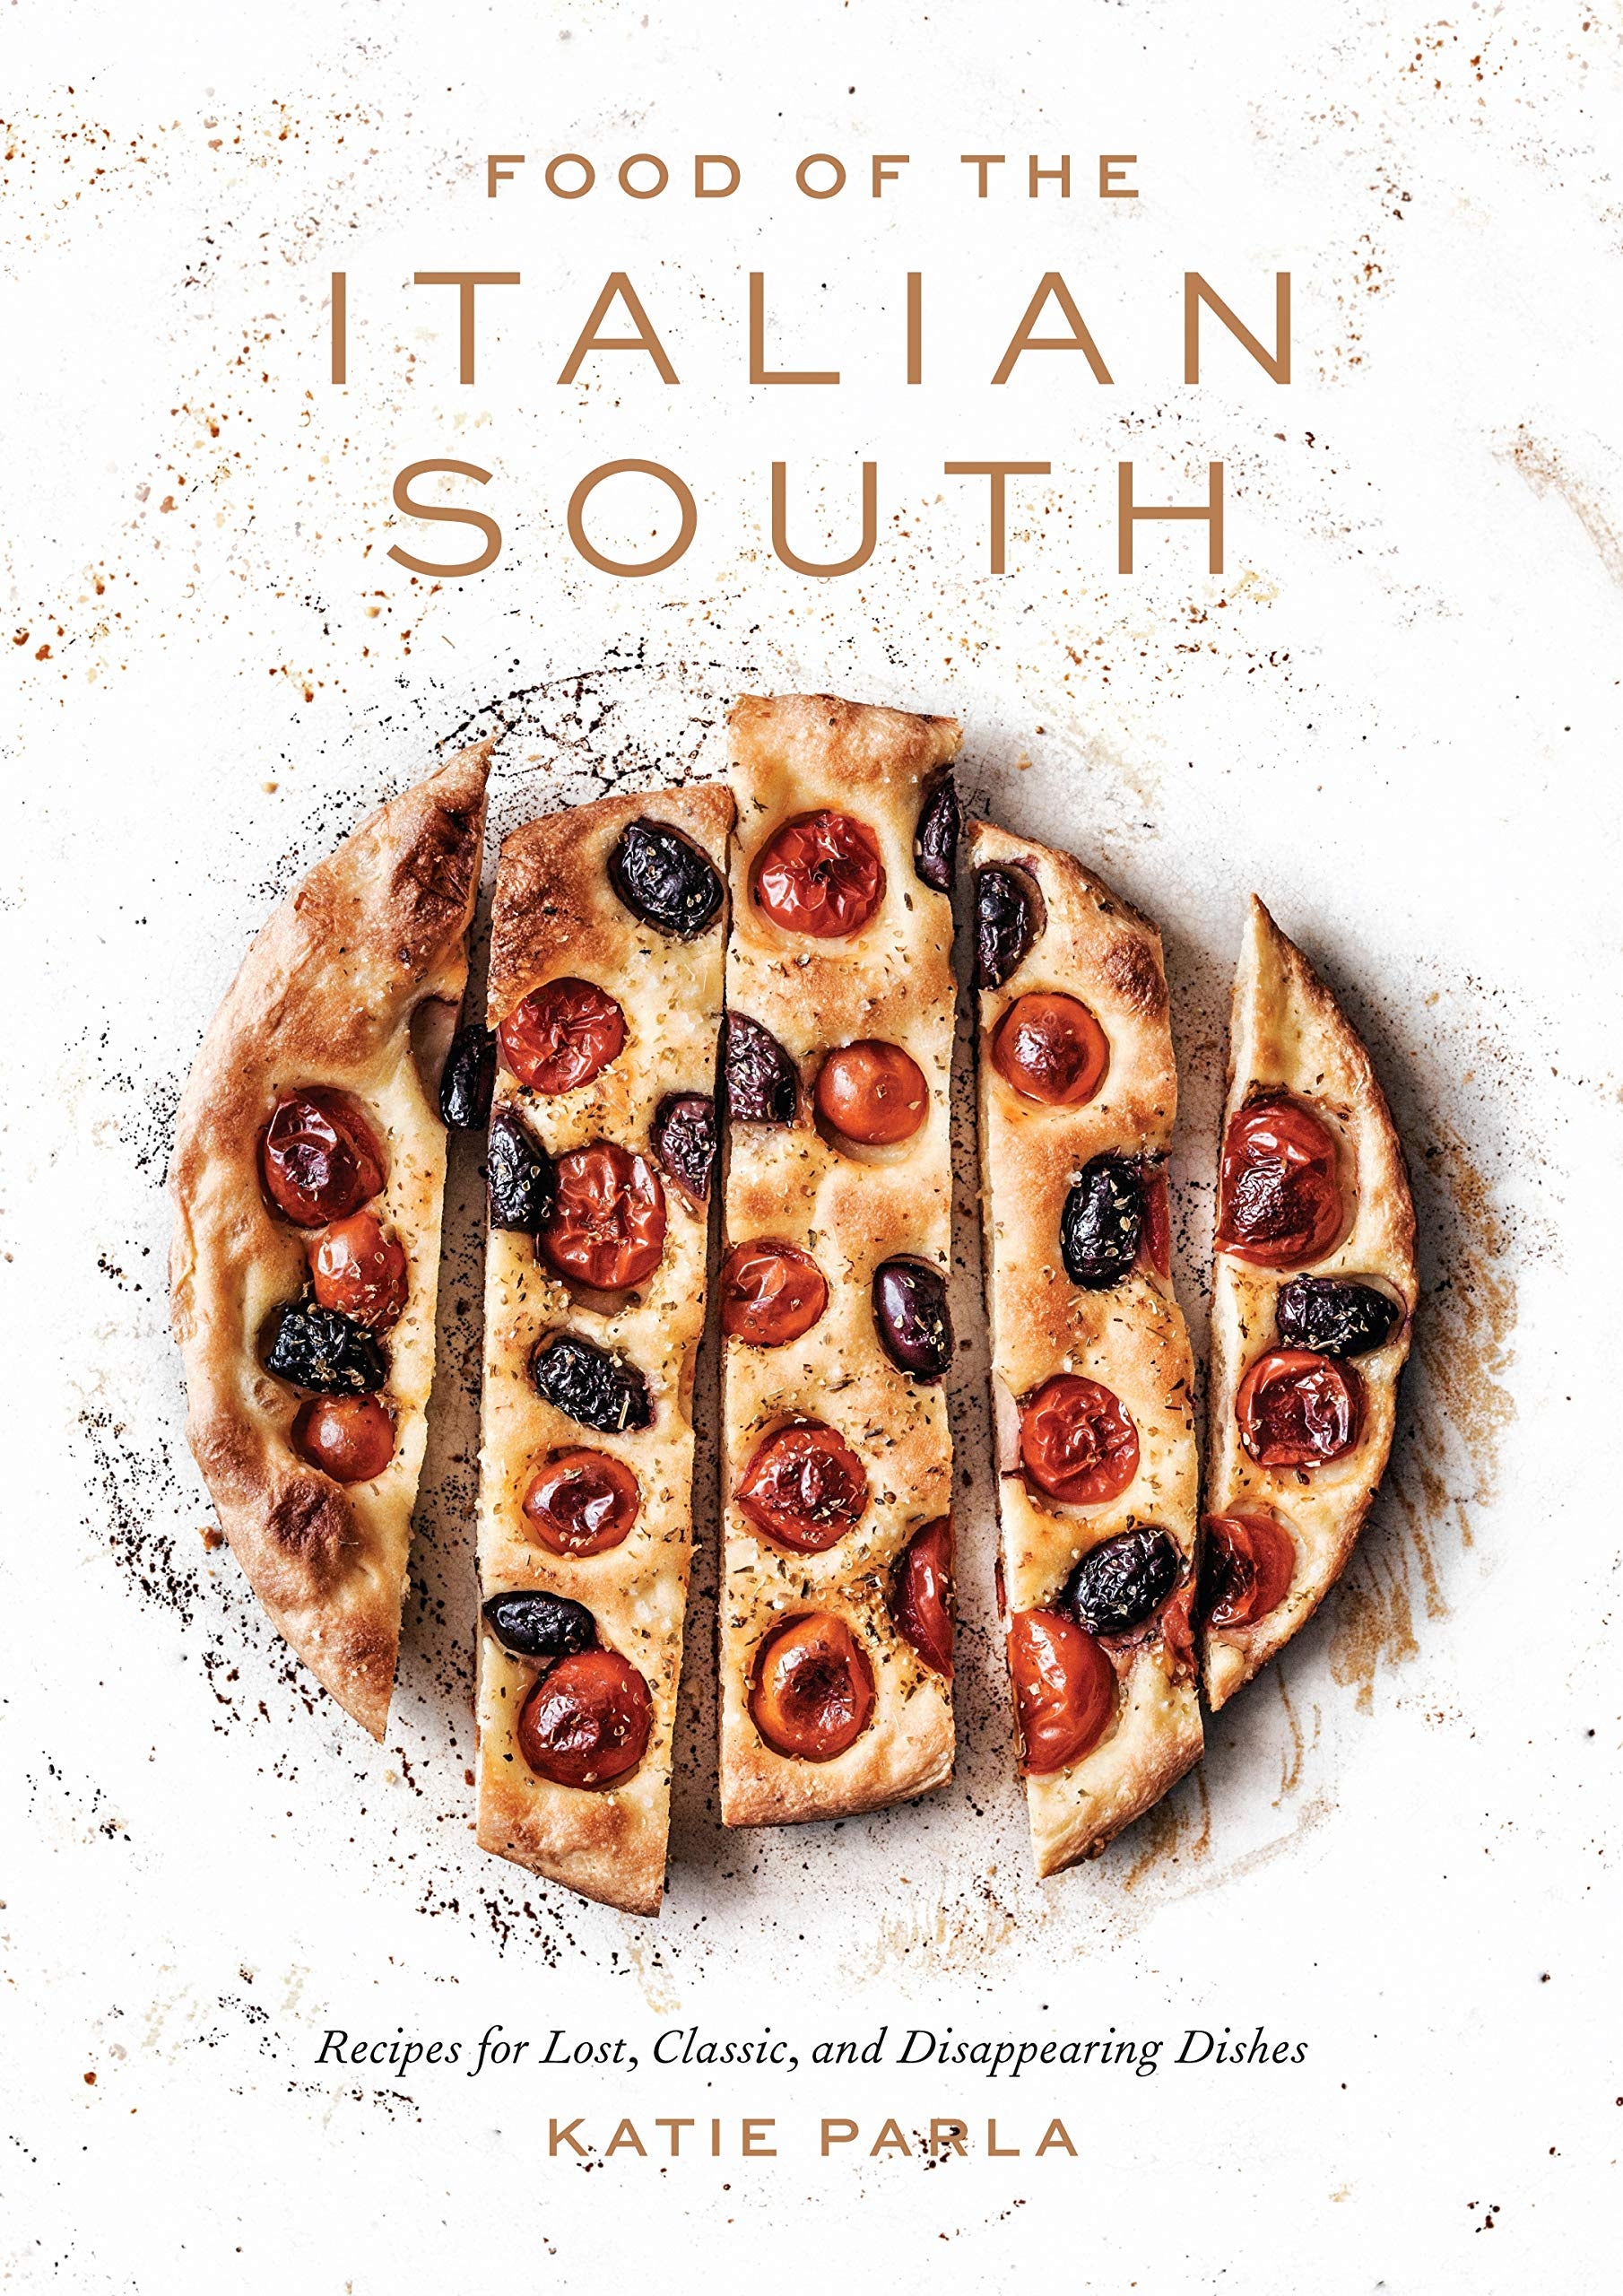 Food of the Italian South: Recipes for Classic, Disappearing, and Lost Dishes (Katie Parla)